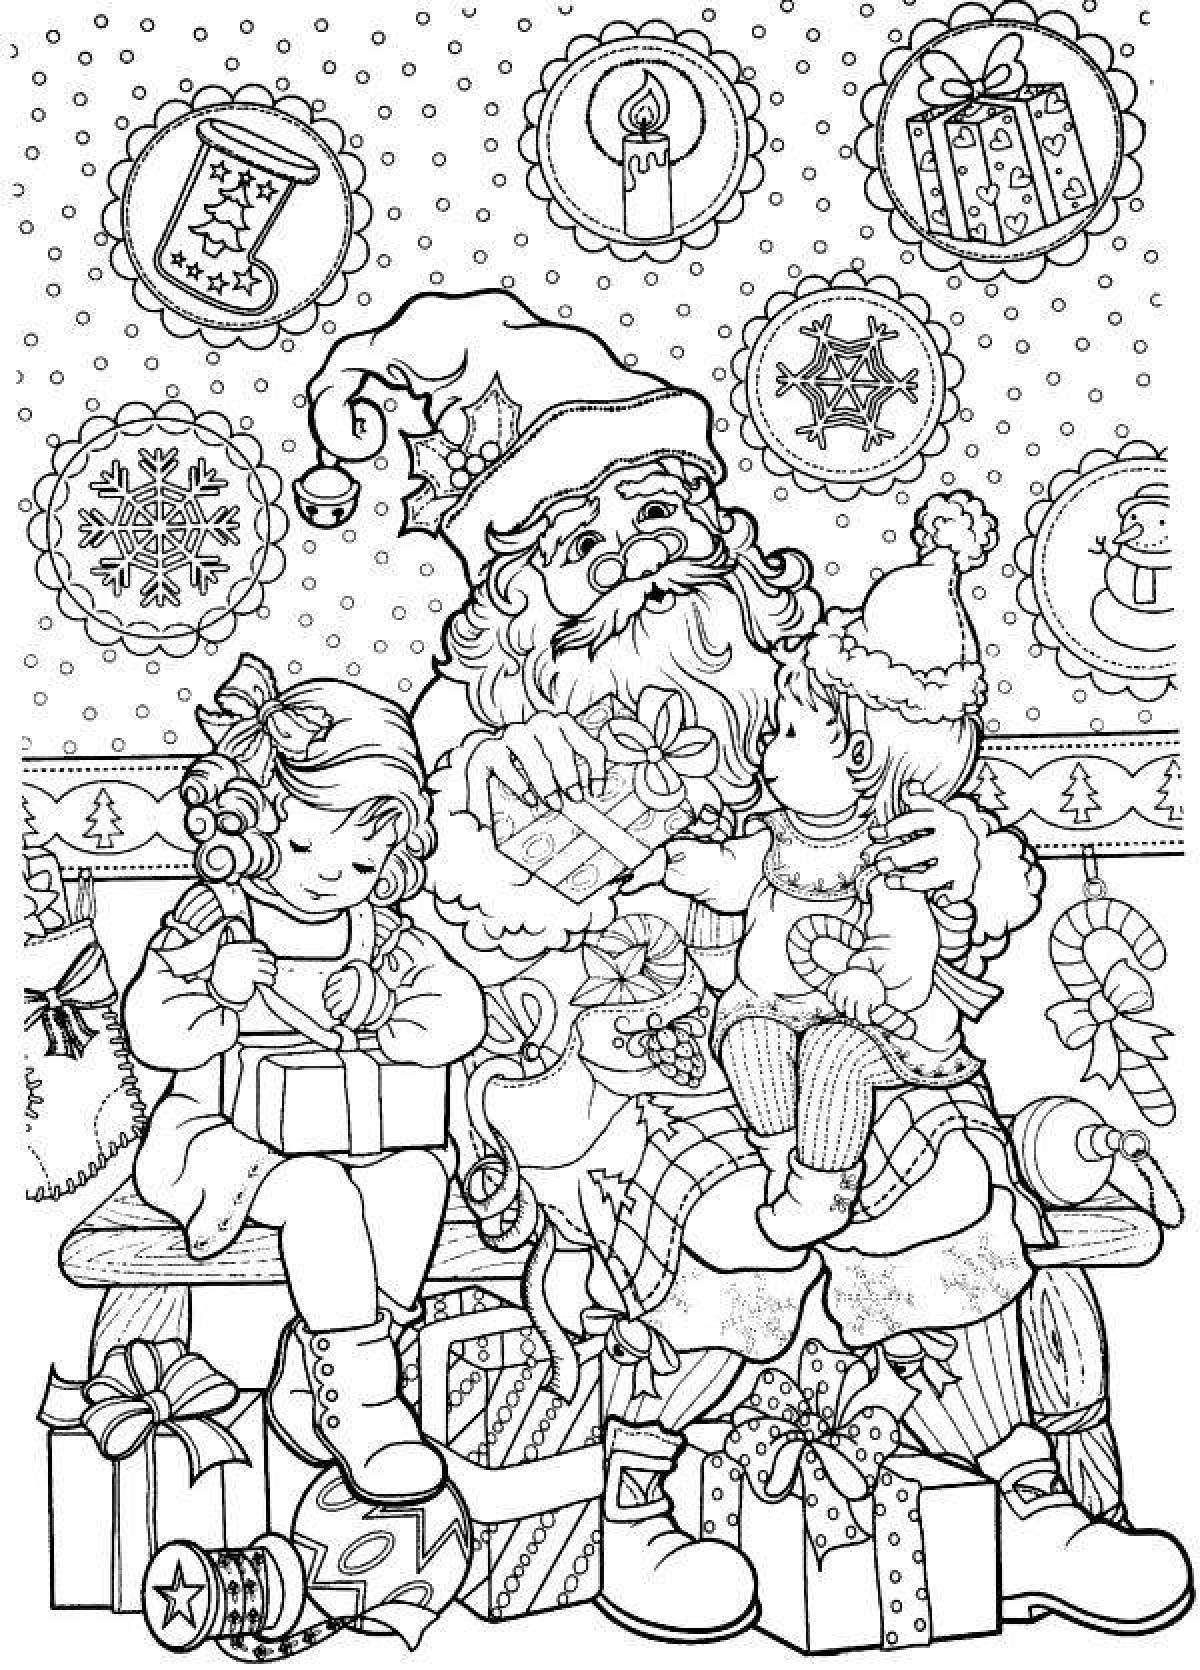 Exciting Christmas wonders coloring pages